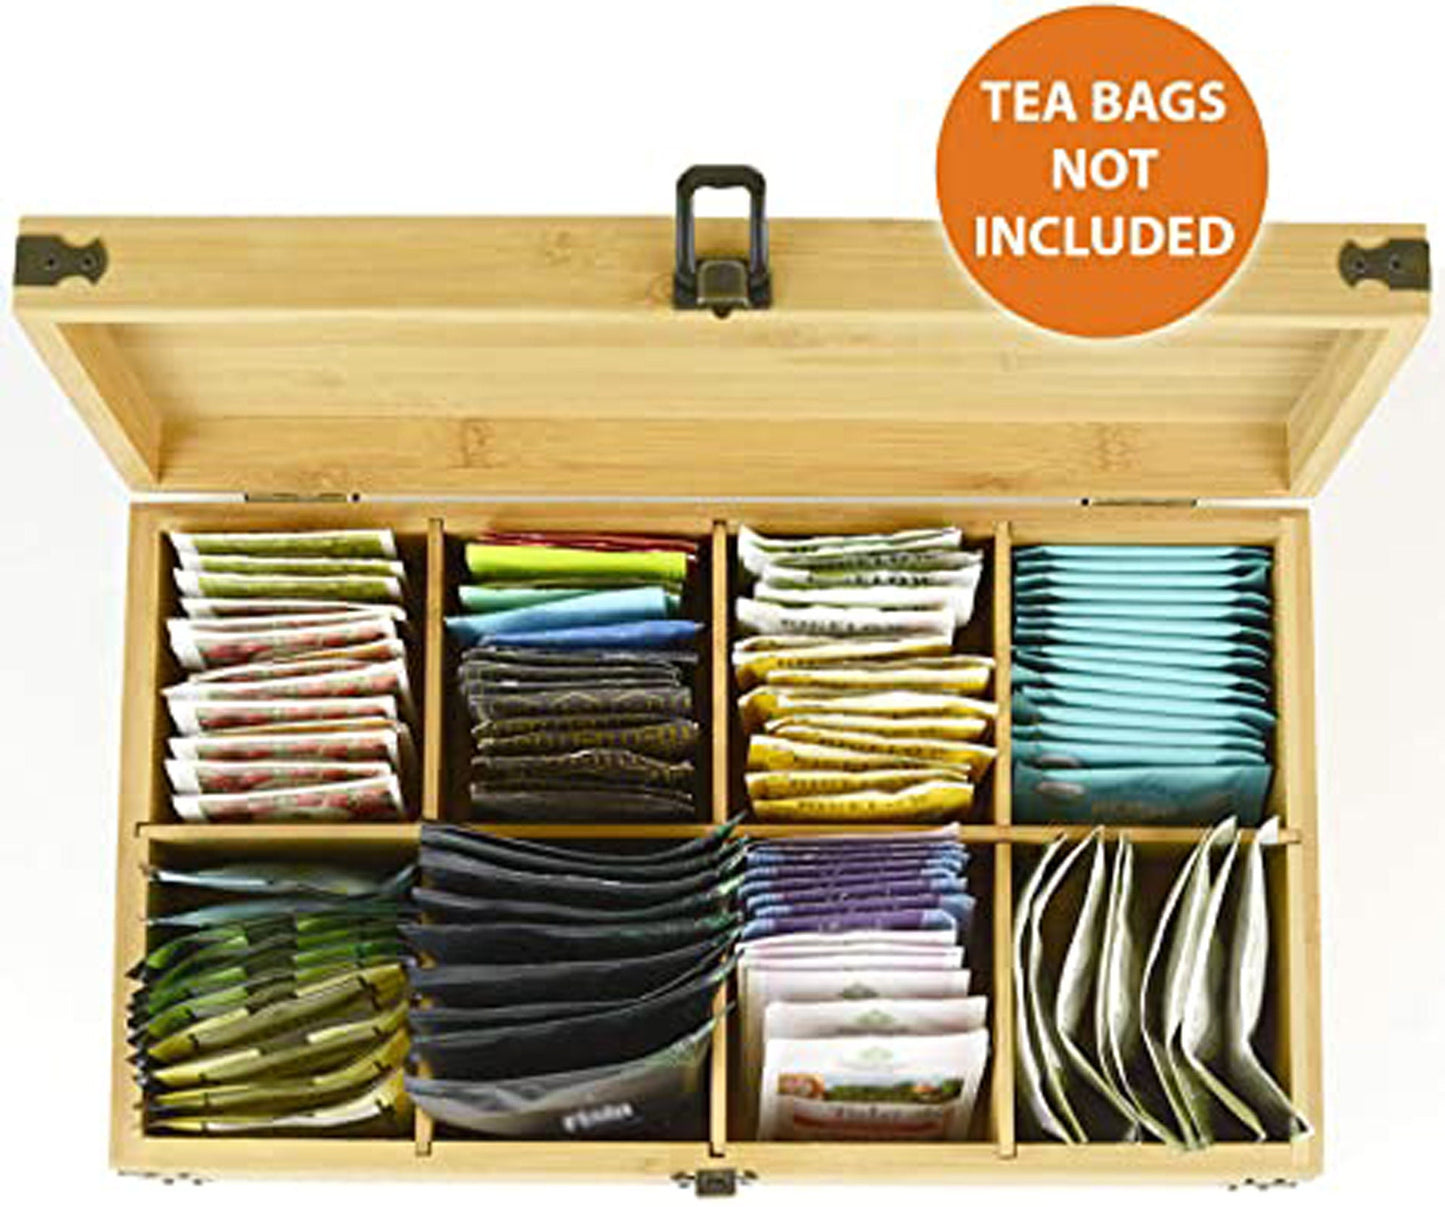 Zen Earth Inspired Tea Time Organizer Box Big & Tall 14" x 8" x 4" Bamboo Wooden Storage Chest 8 Tall Adjustable Slots Eco-Friendly